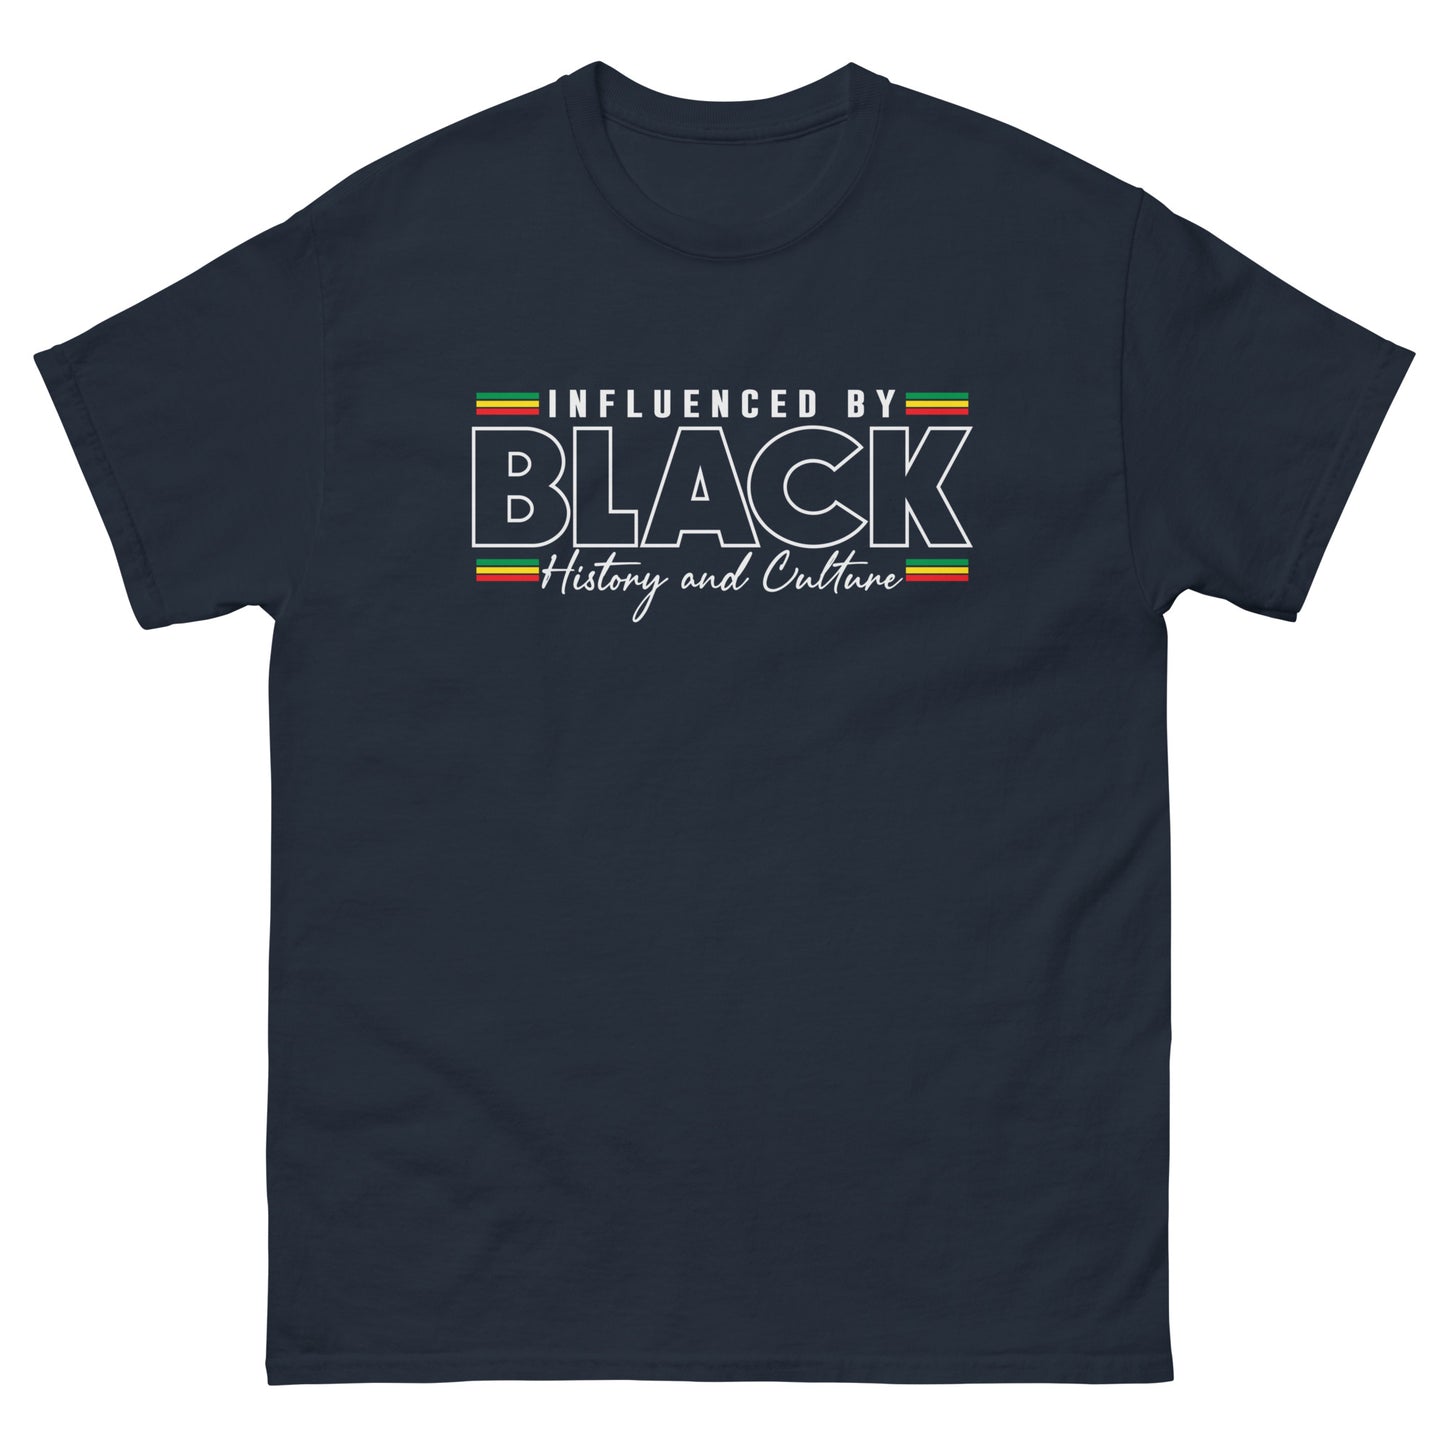 Black History and Culture Men's classic tee